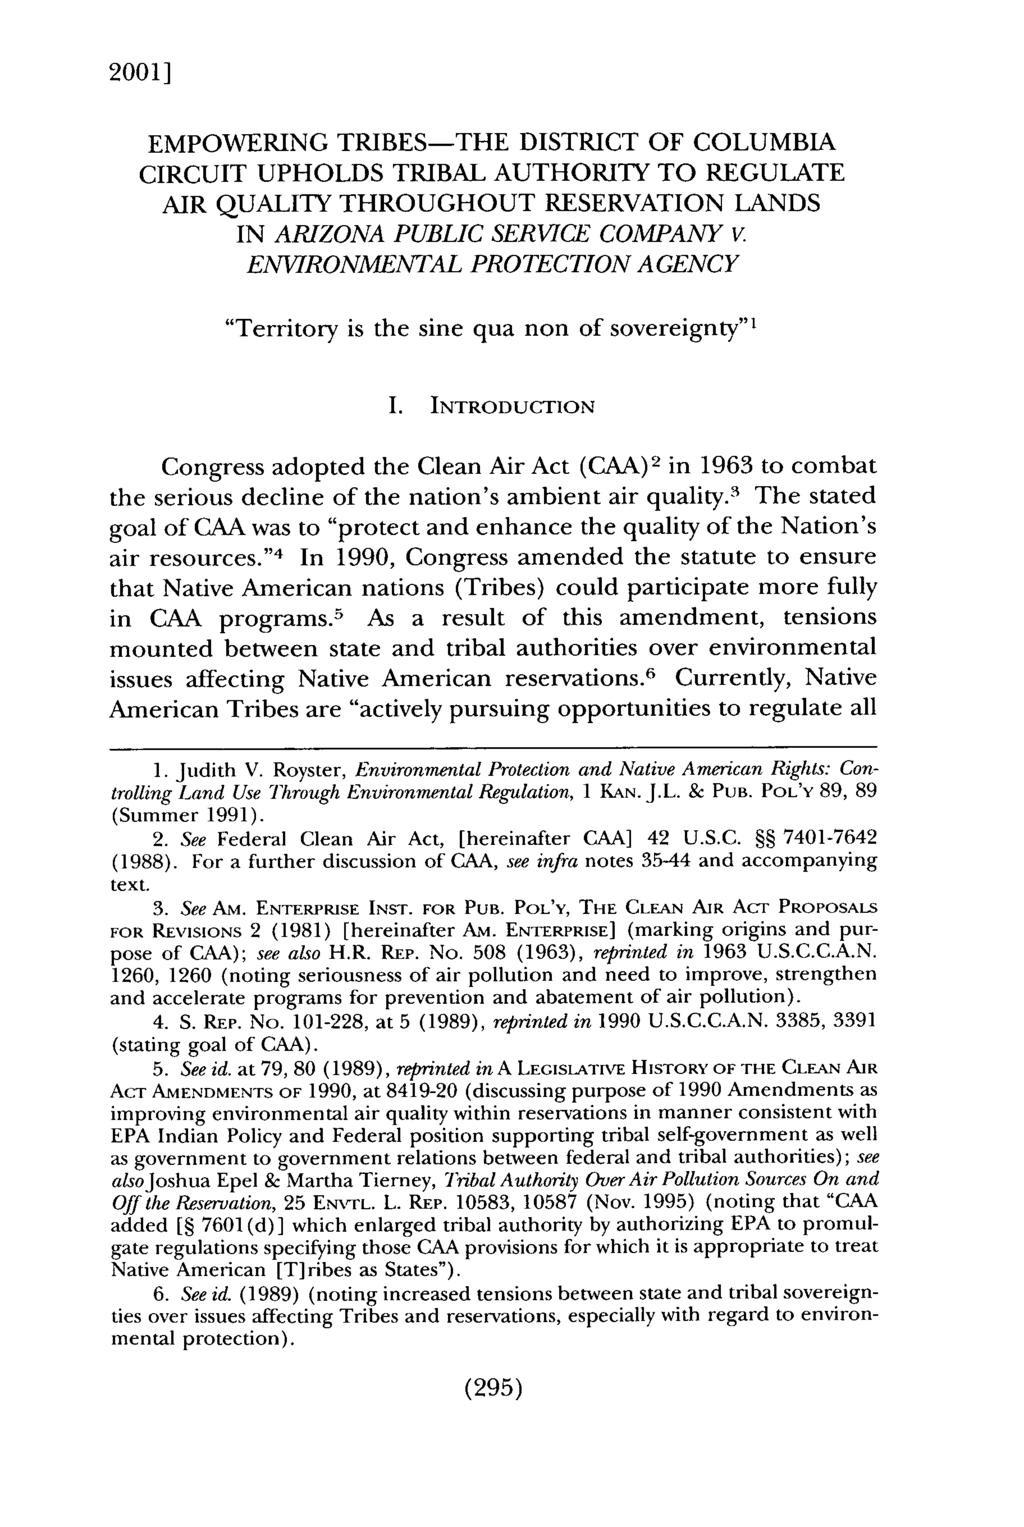 2001] Reader: Empowering Tribes - The District of Columbia Circuit Upholds Trib EMPOWERING TRIBES-THE DISTRICT OF COLUMBIA CIRCUIT UPHOLDS TRIBAL AUTHORITY TO REGULATE AIR QUALITY THROUGHOUT